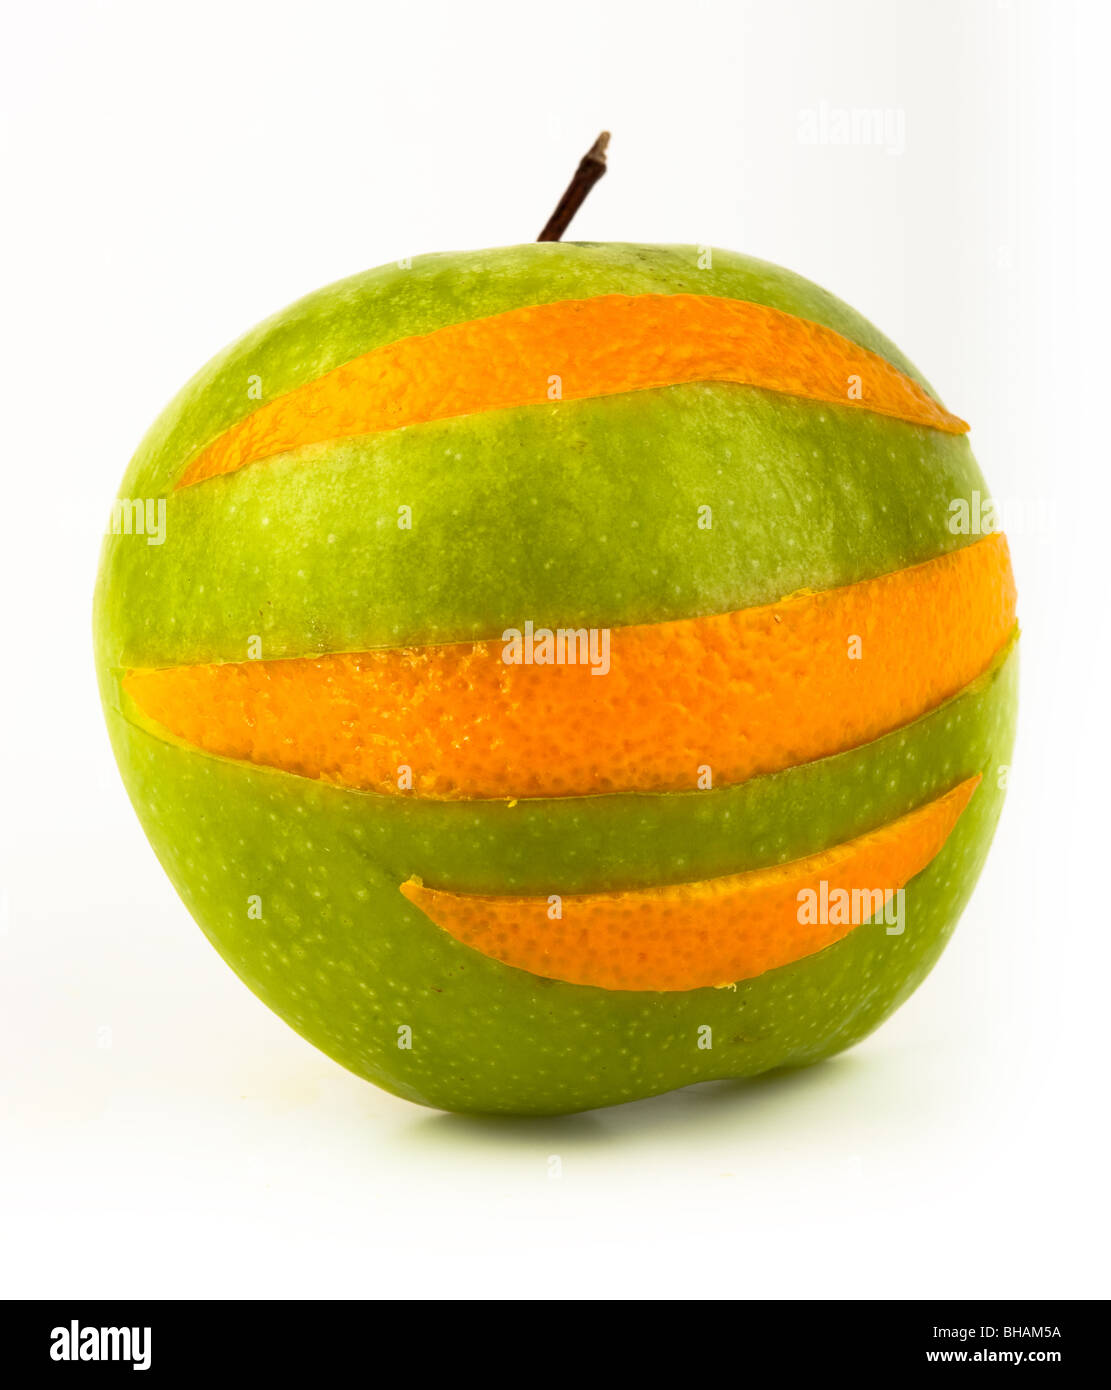 Ripe juicy fruit on a white background. Cut Out Stock Photo